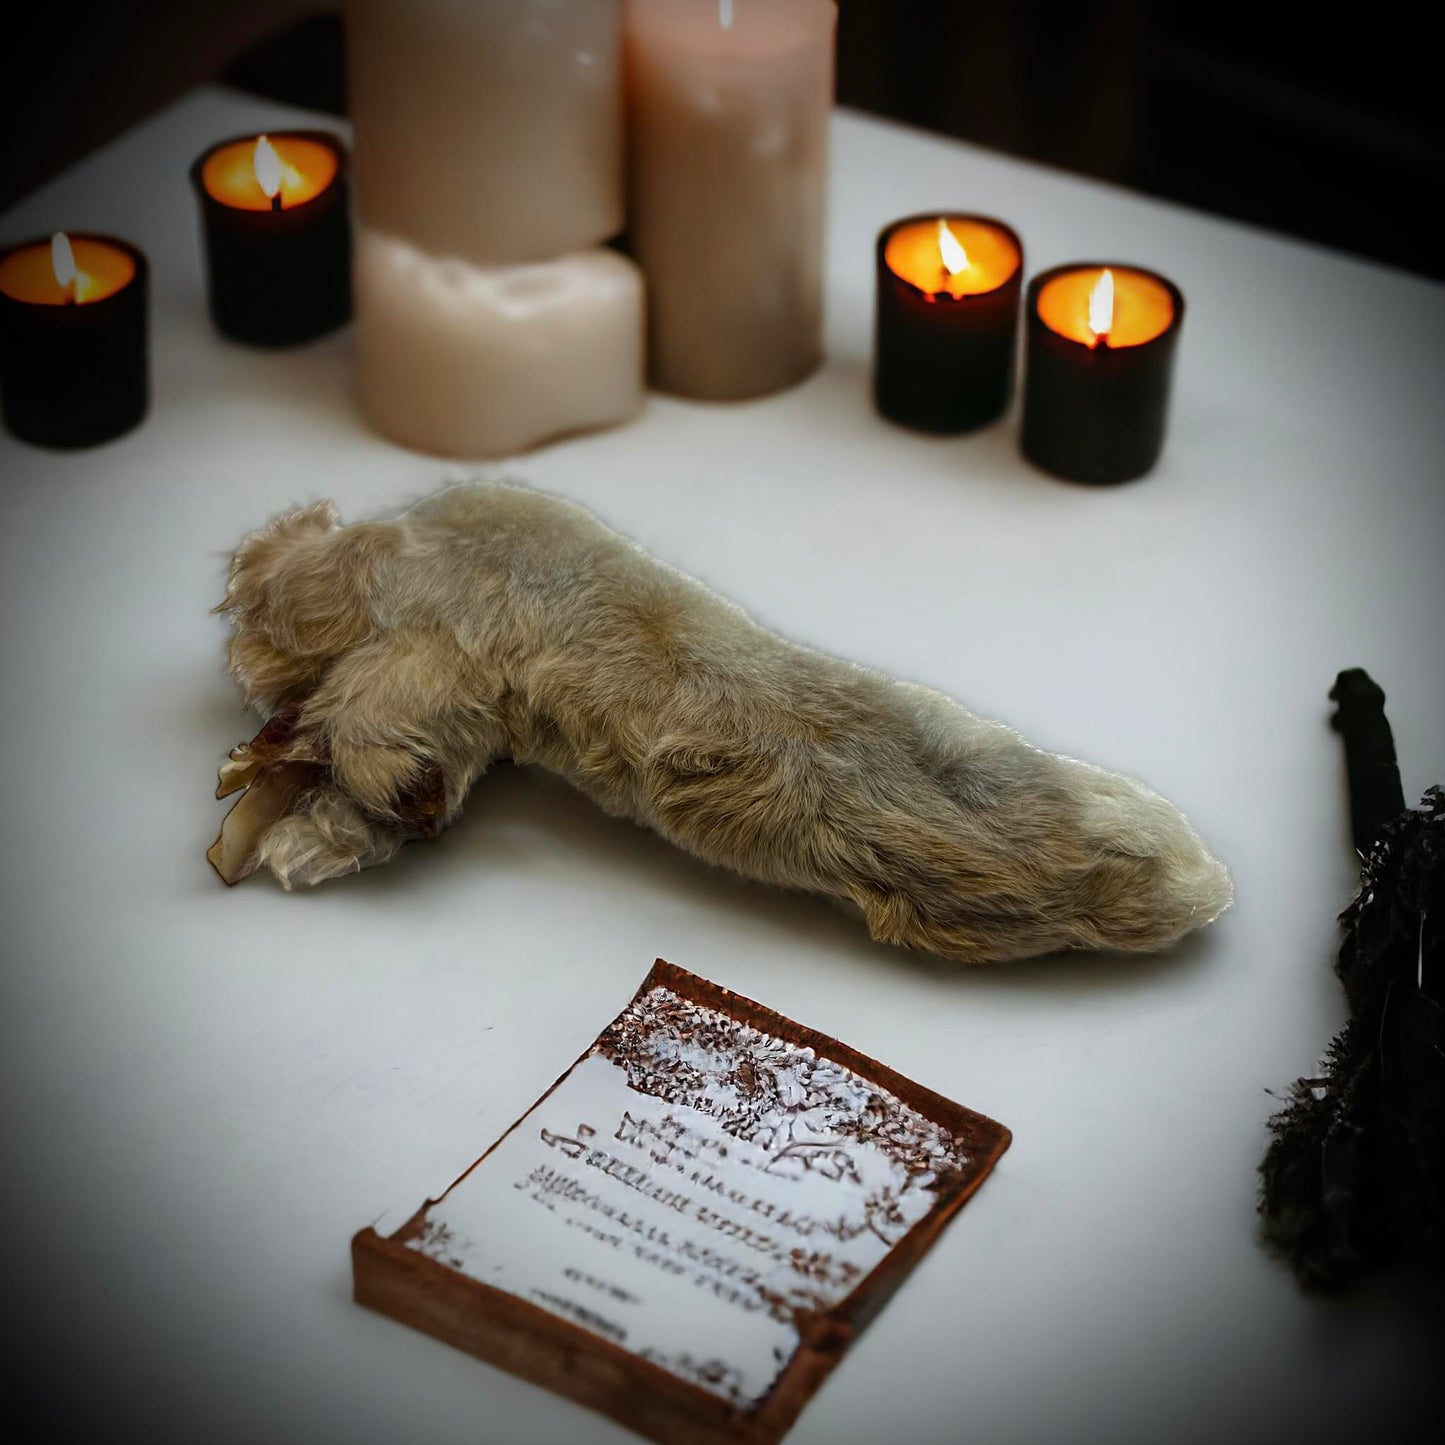 Natural Real Rabbit Foot Dehydrated Gothic Voodoo Witchcraft Curiosity, Oddity, Real Animal Bones, Taxidermy, Unique Gift Idea Specimen 2406